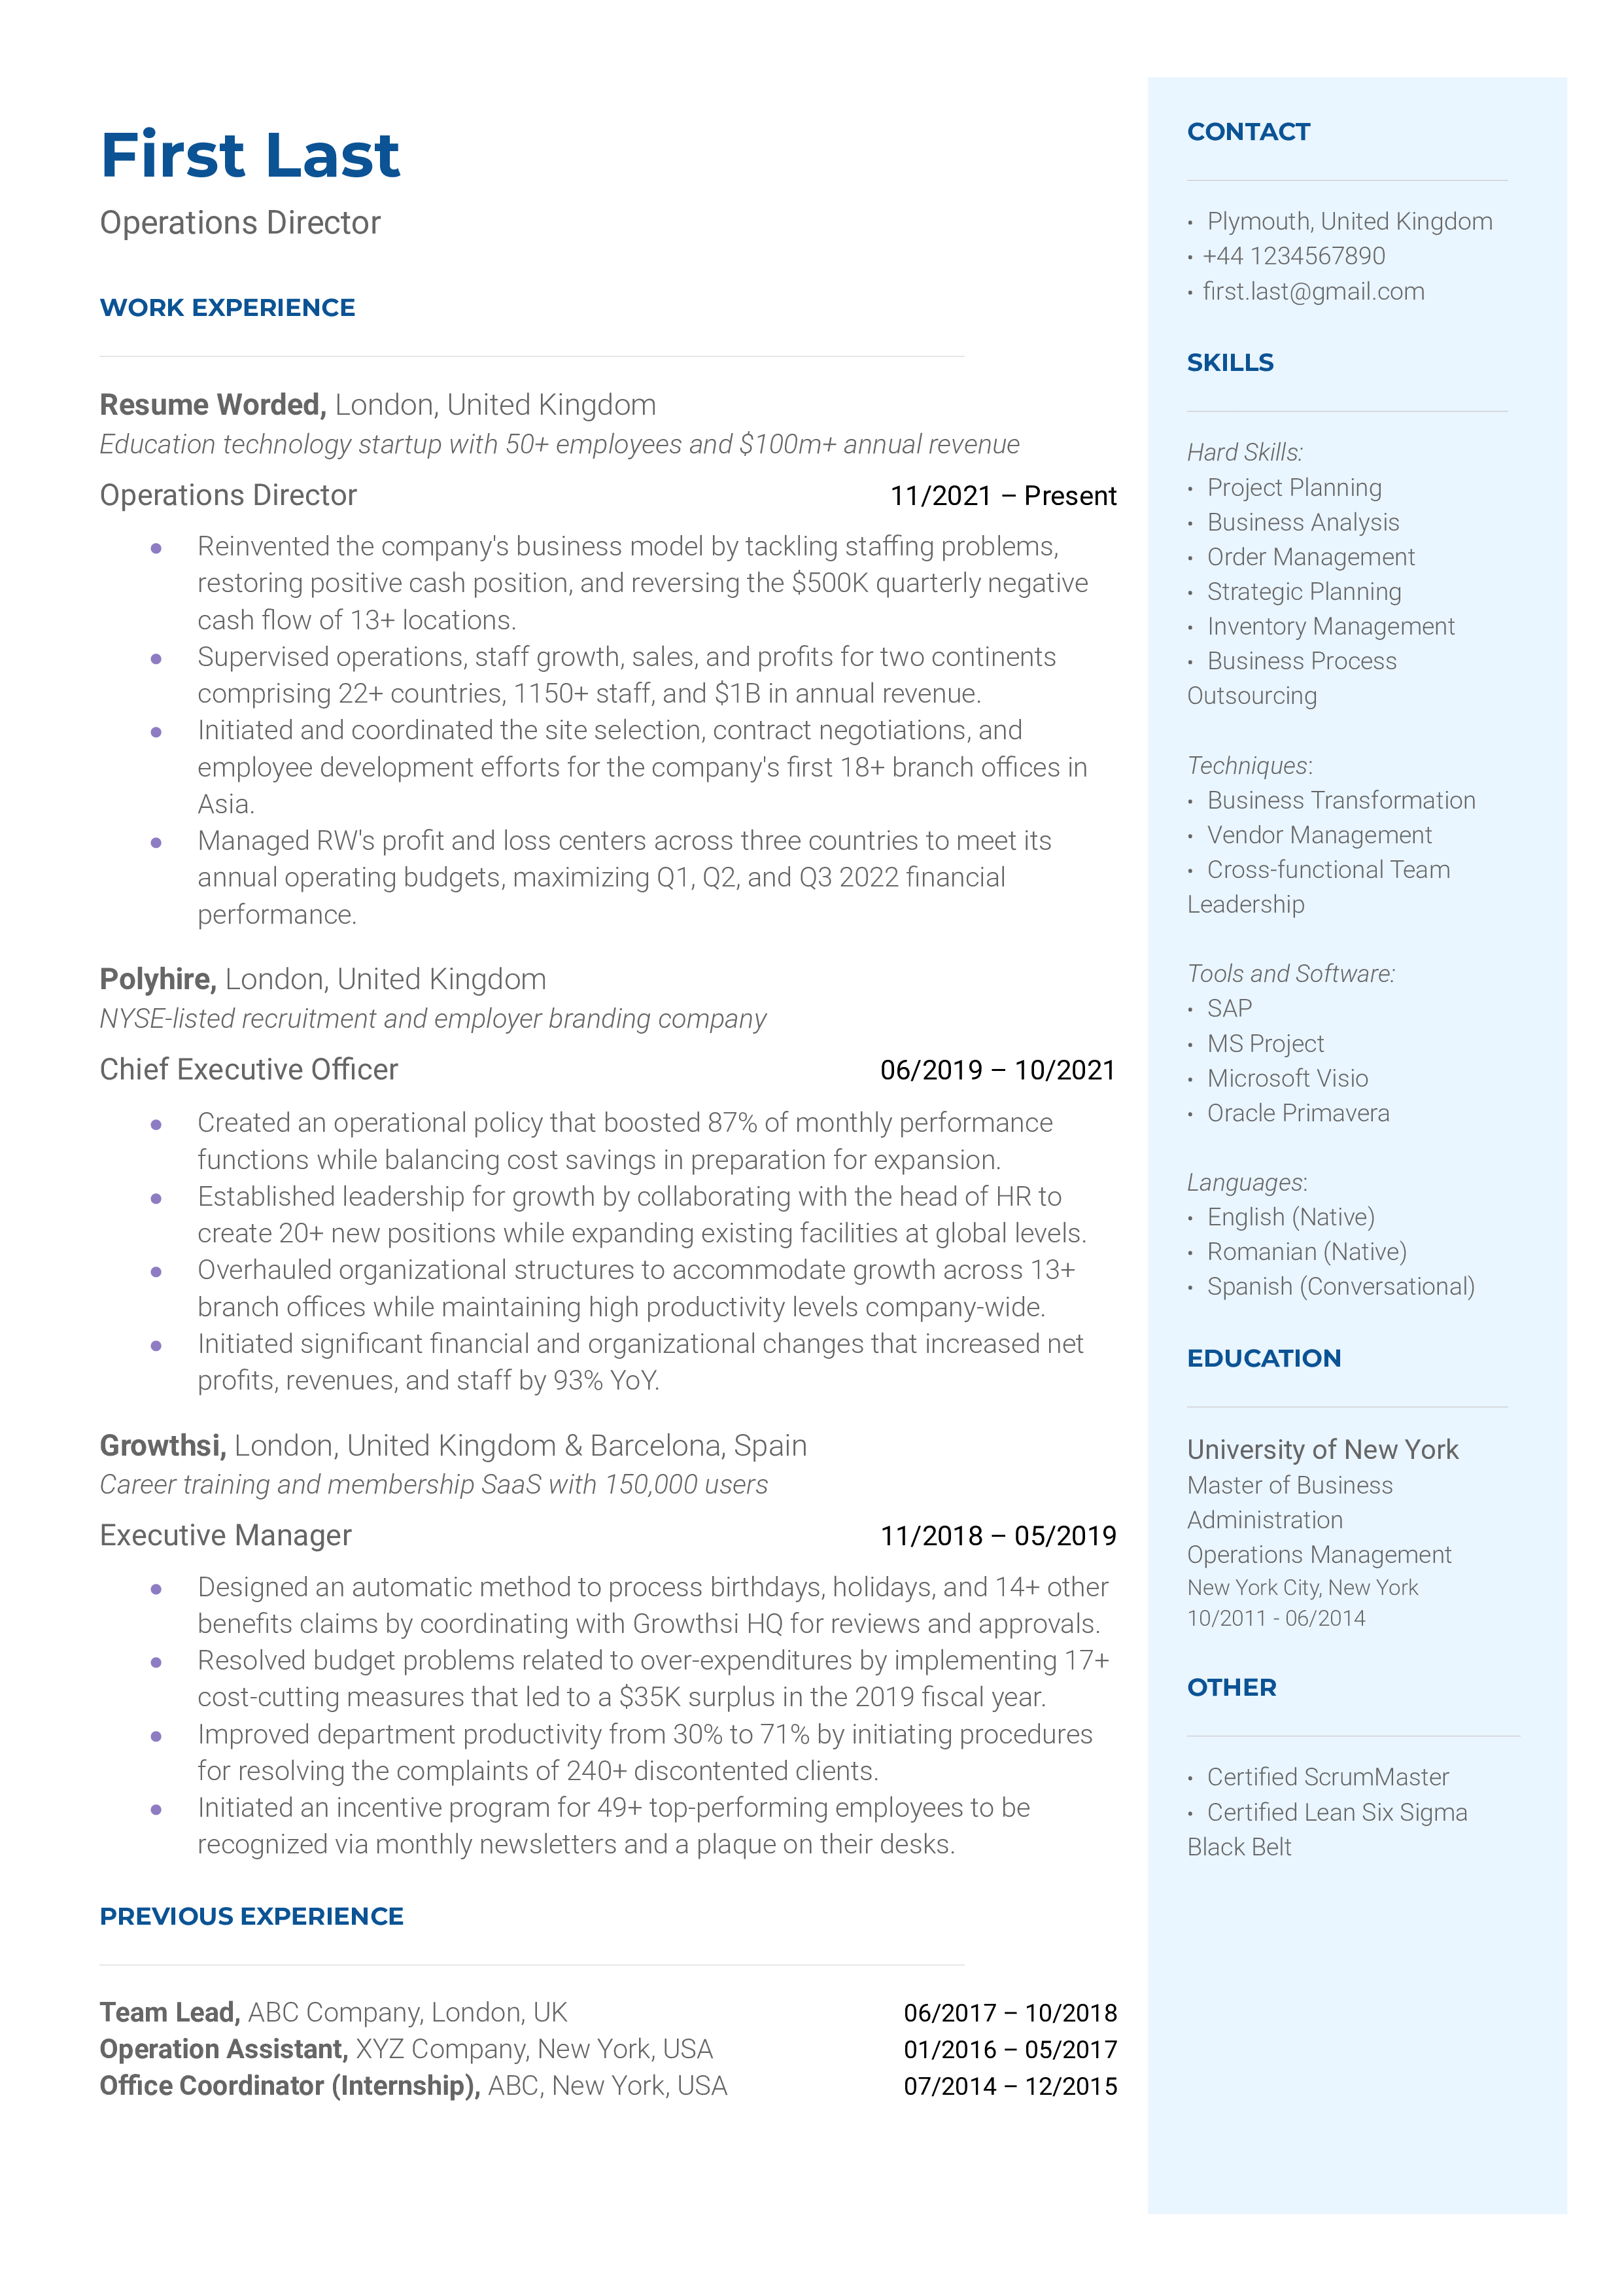 An operations director resume sample that highlights the candidate’s wholesome skills set and management style